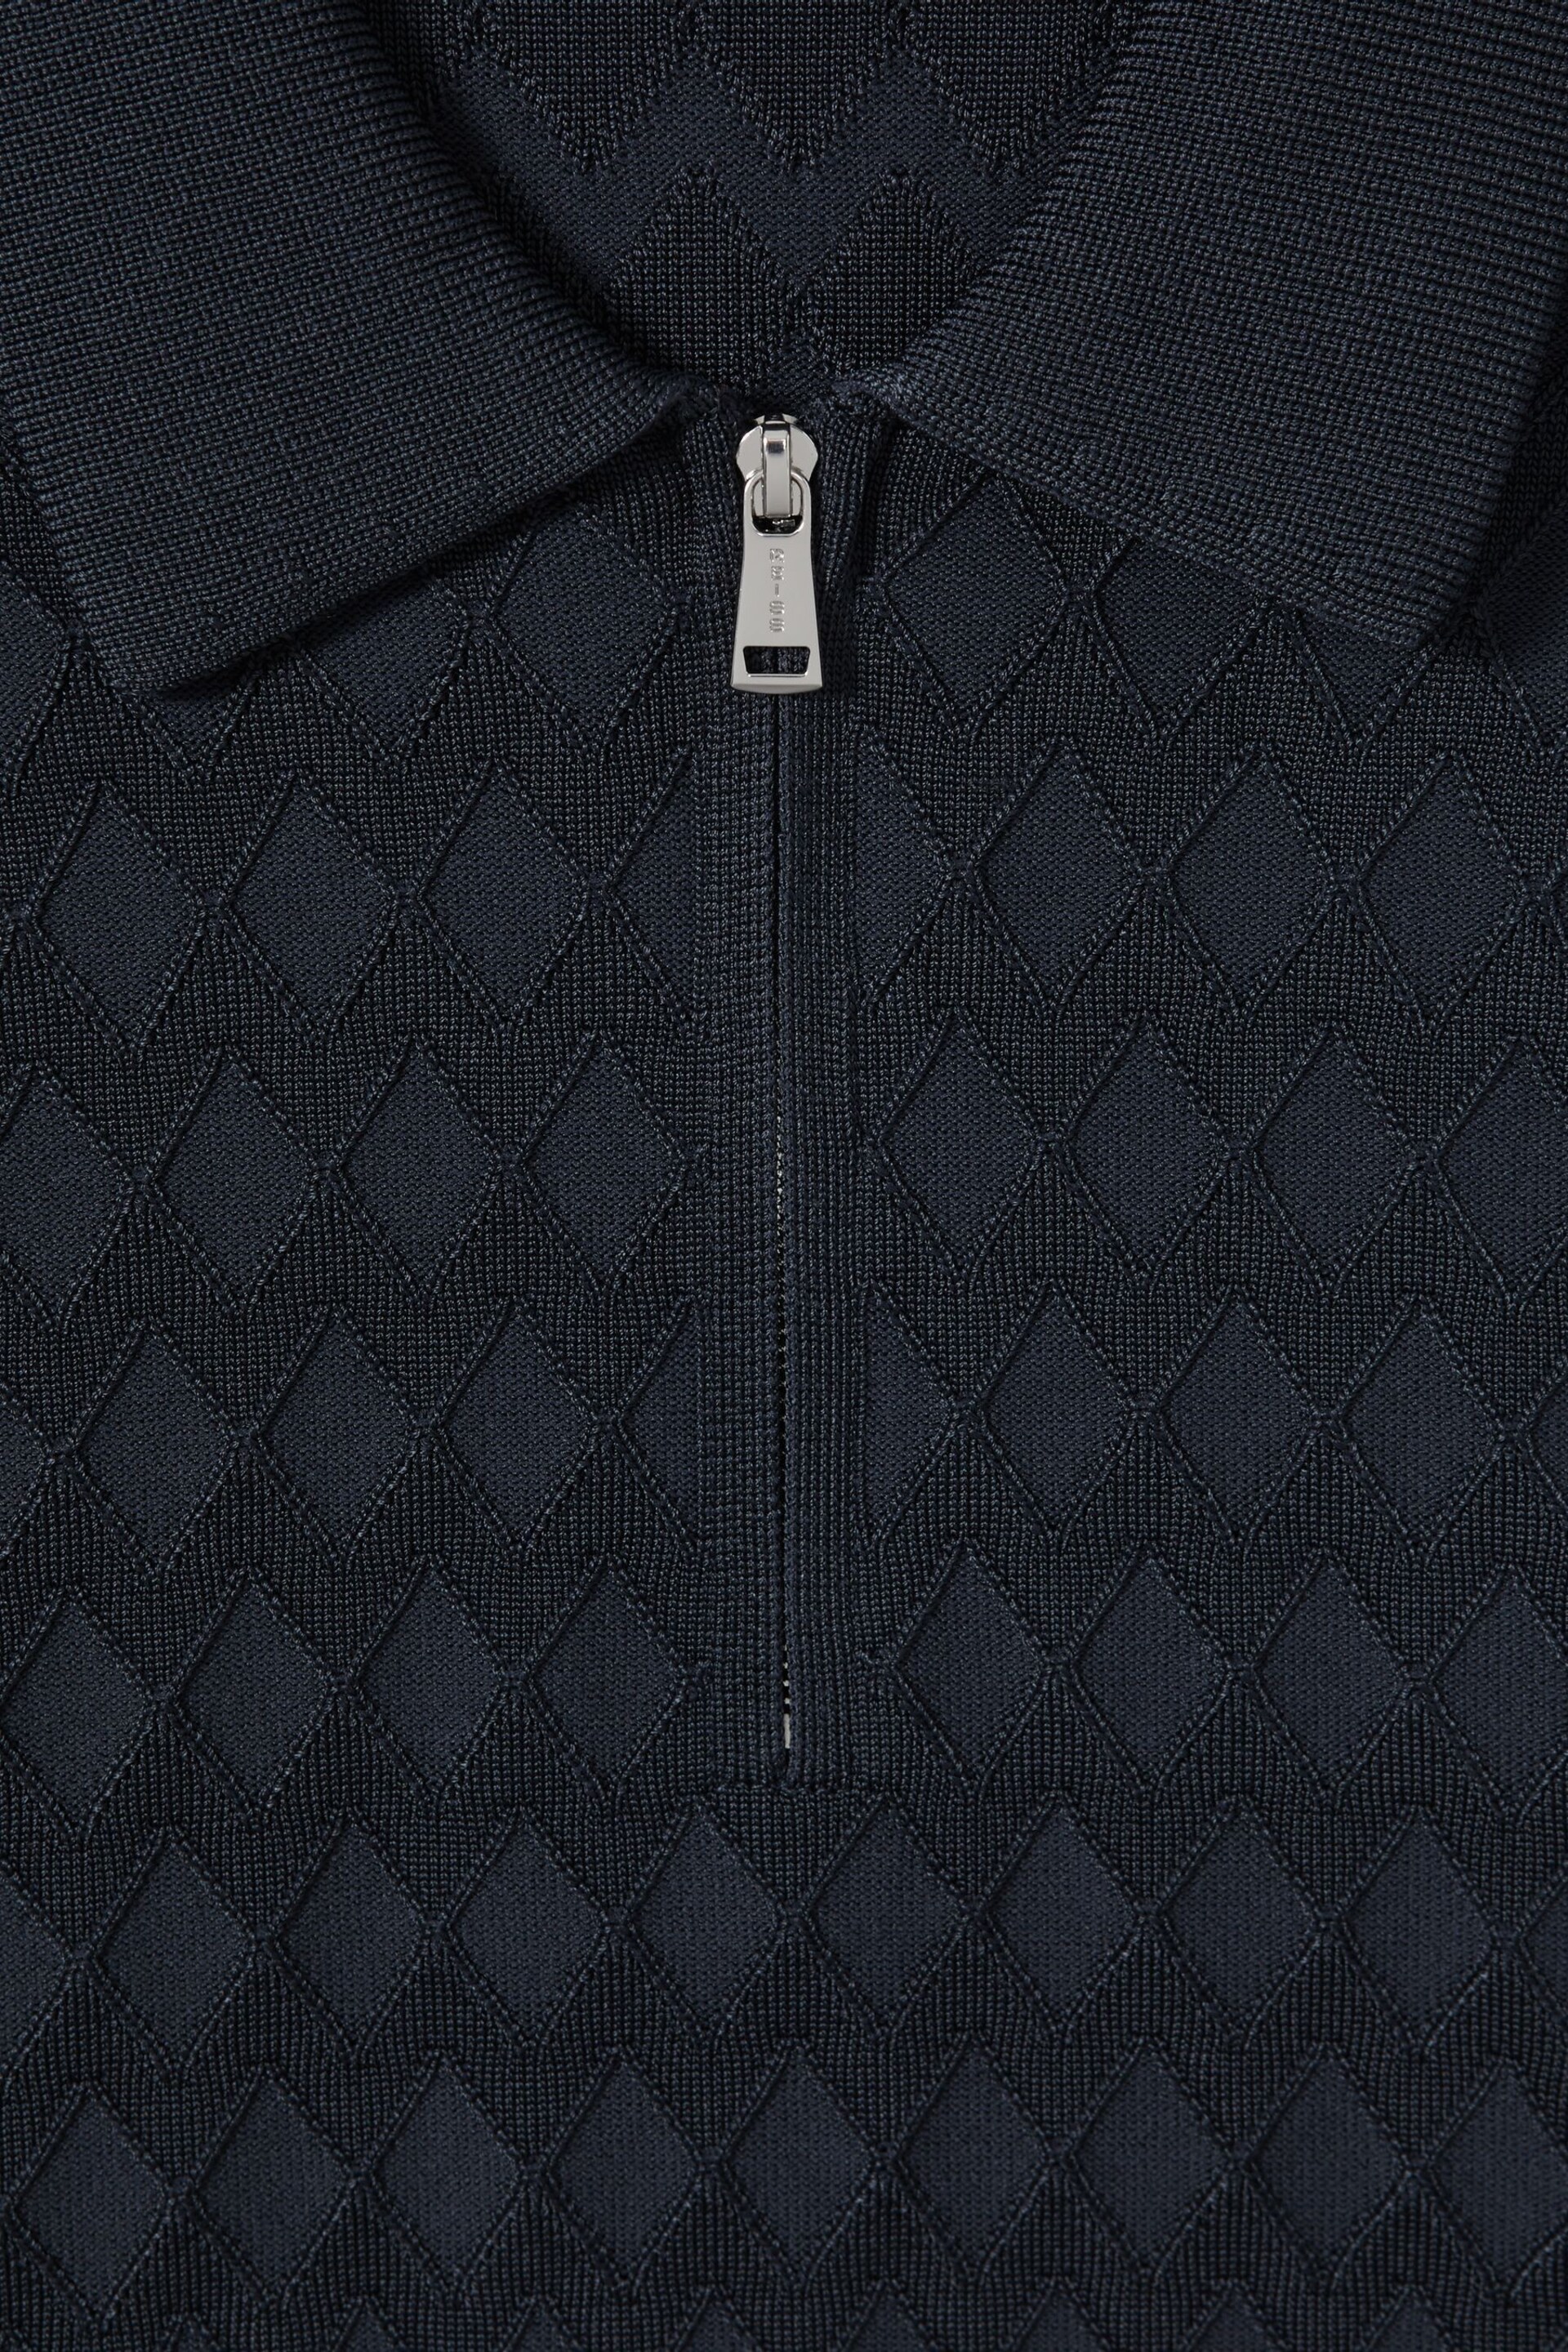 Reiss Navy Rizzo Half-Zip Knitted Polo Shirt - Image 6 of 6